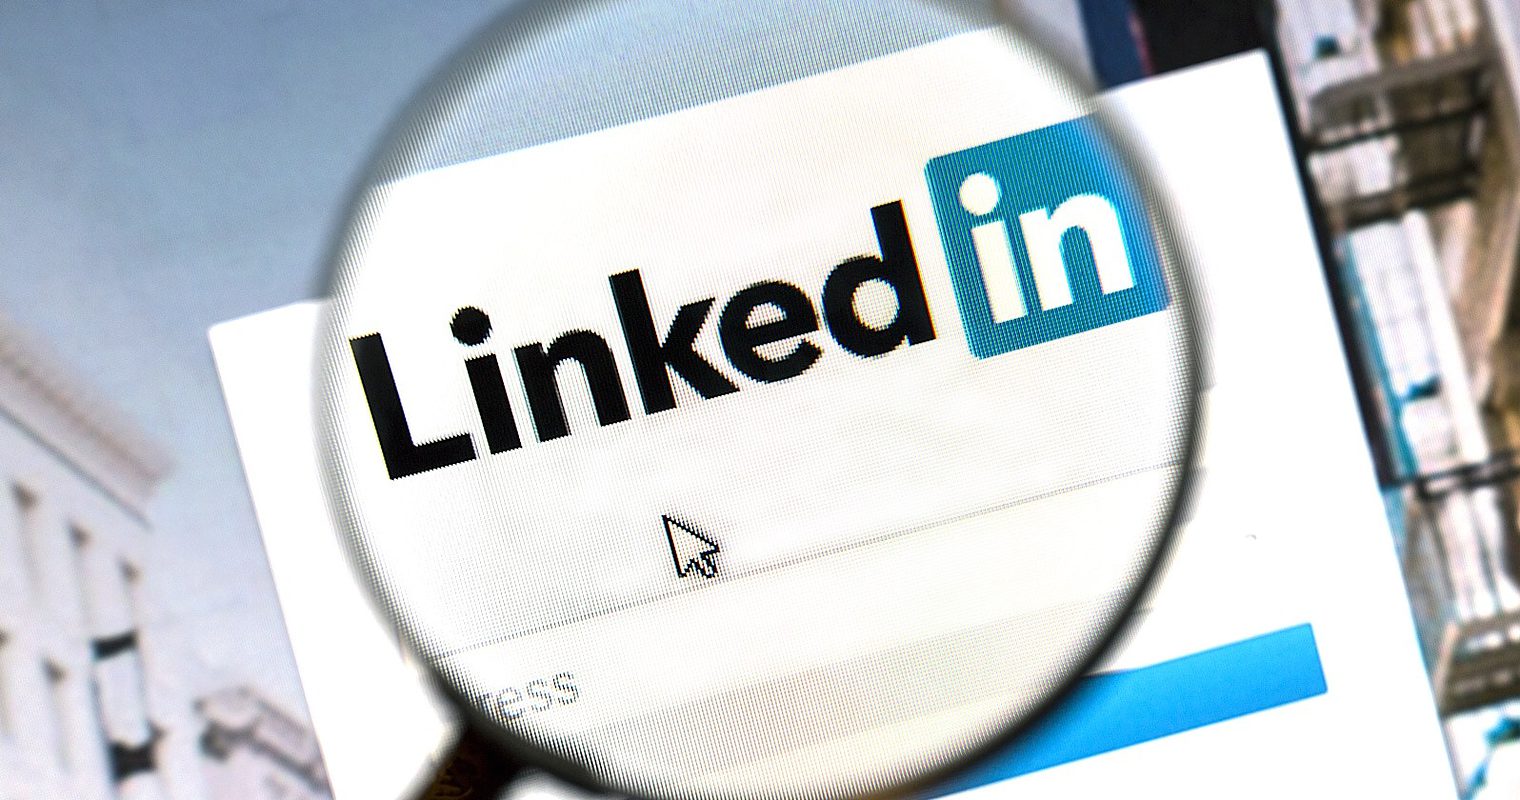 LinkedIn Users Can Now Upload Videos to Their Page